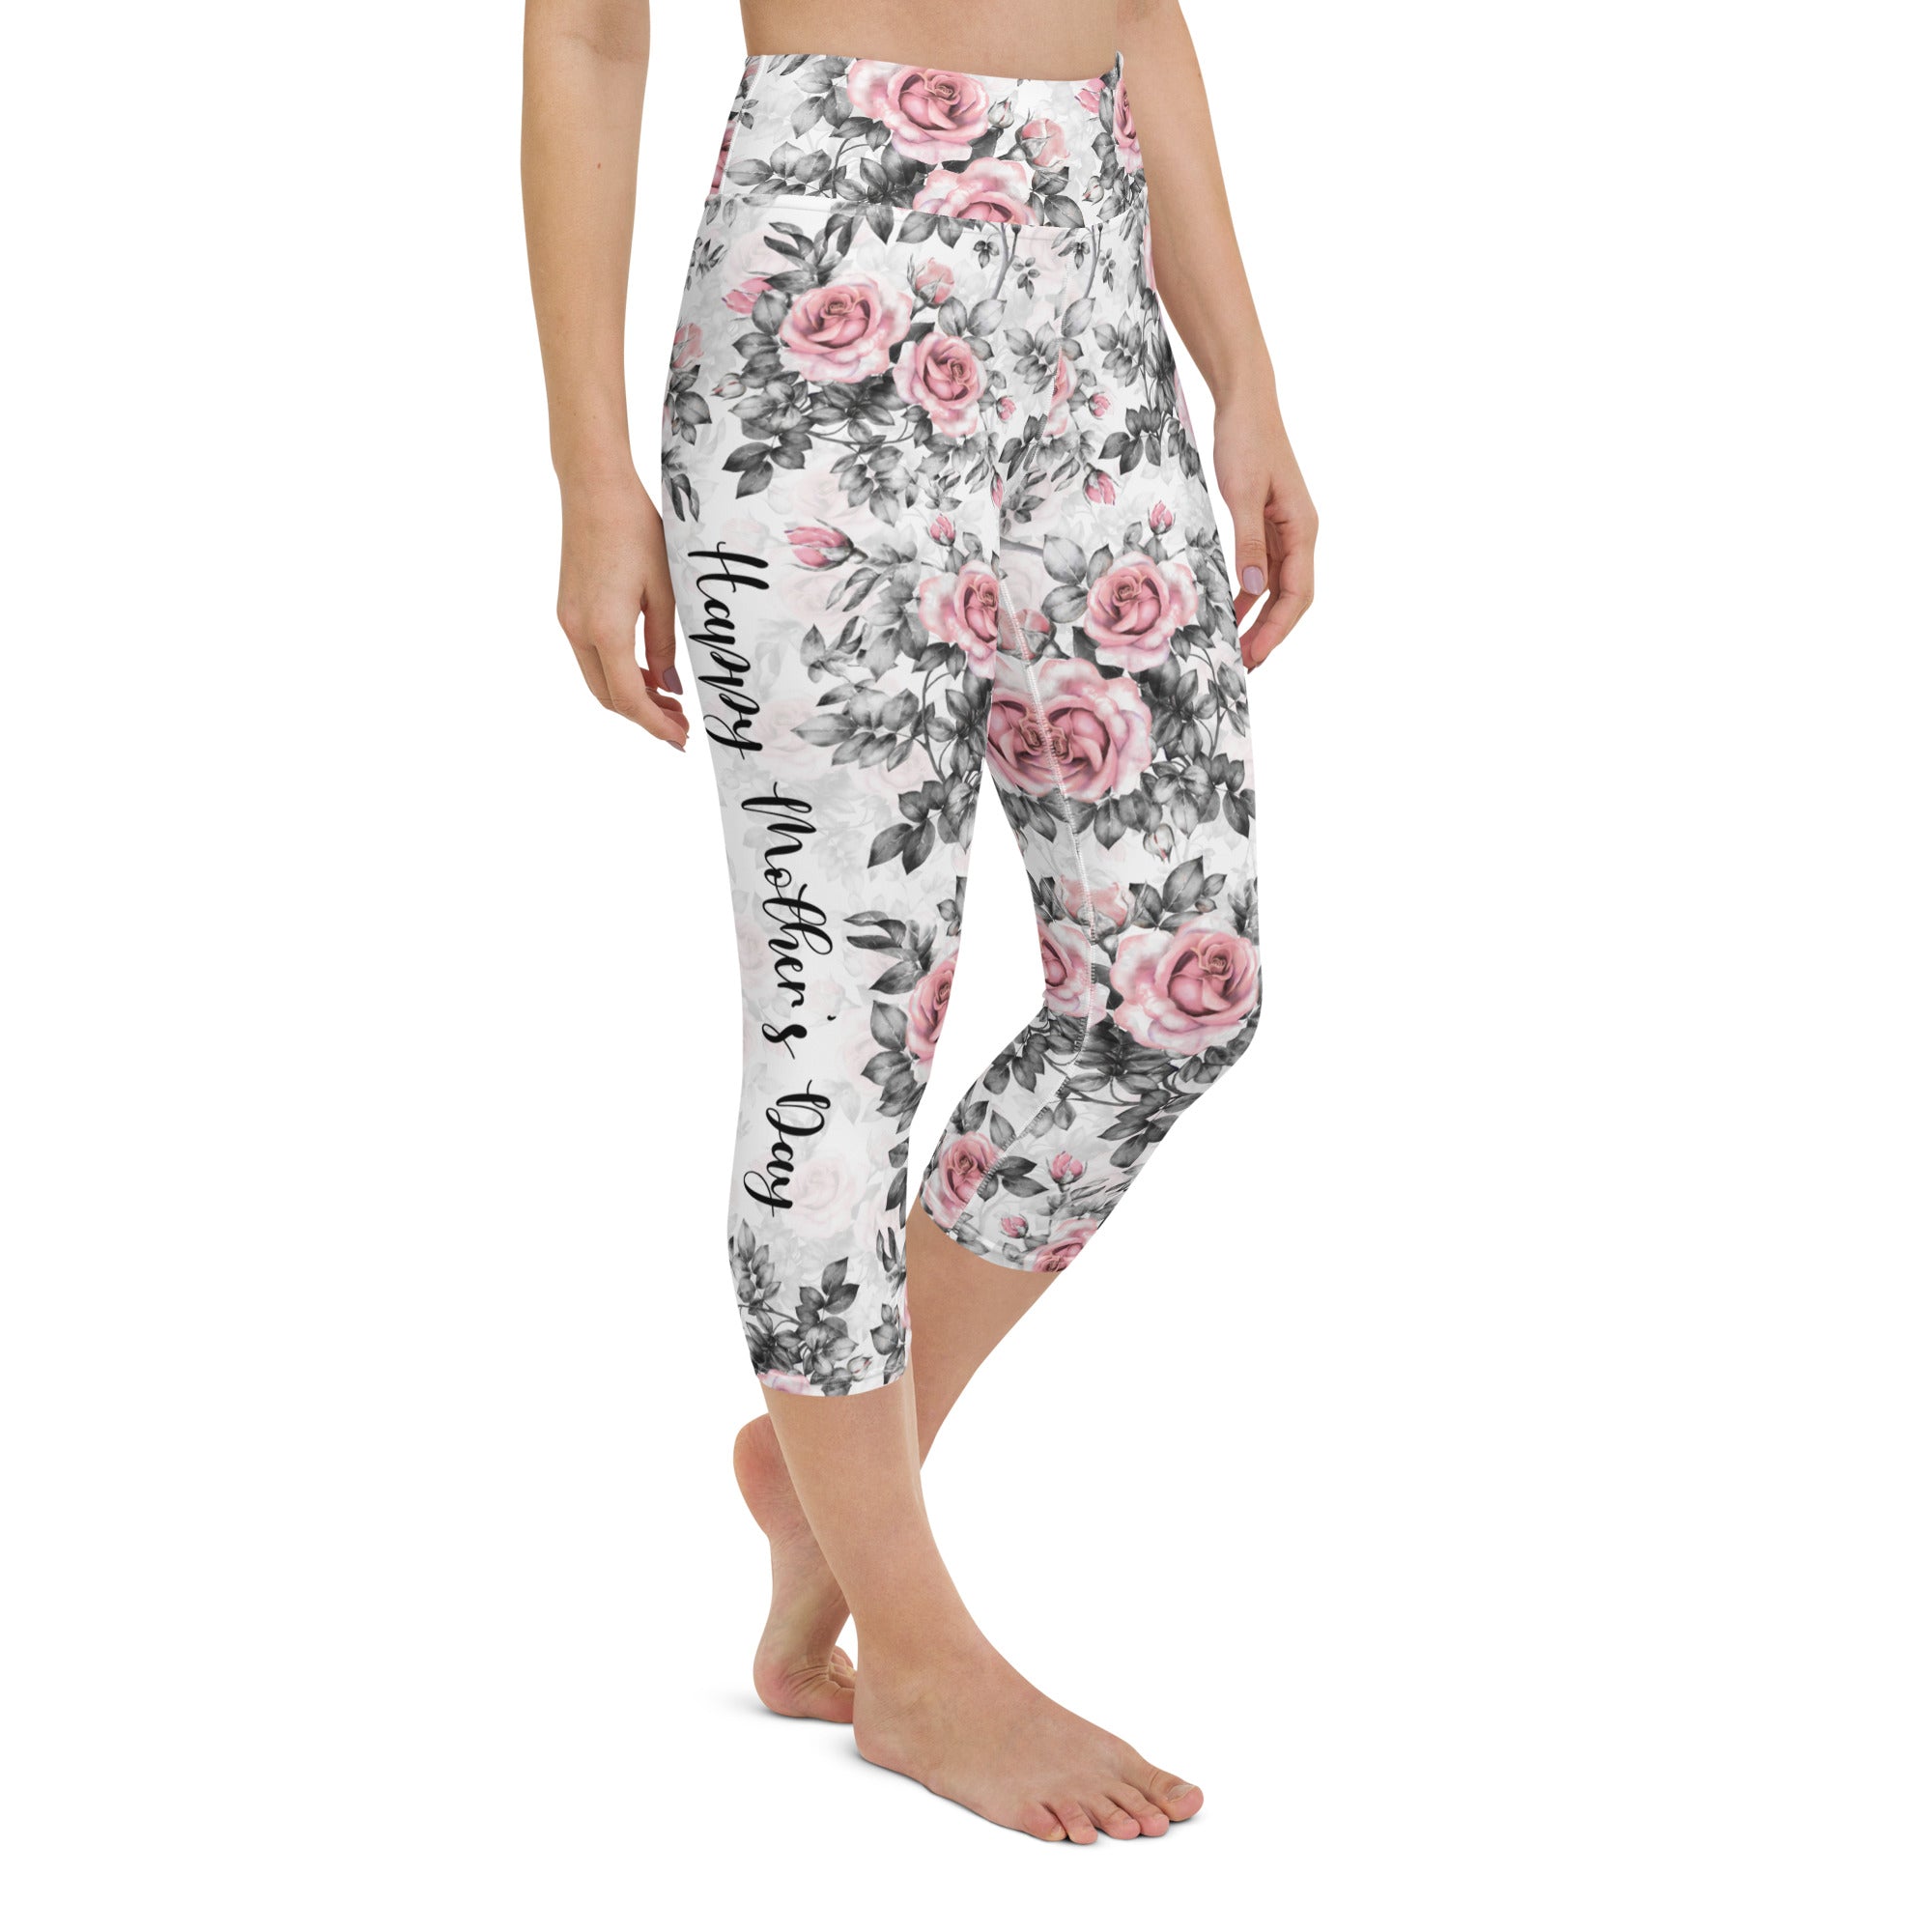 Floral Mother's Day Yoga Capris